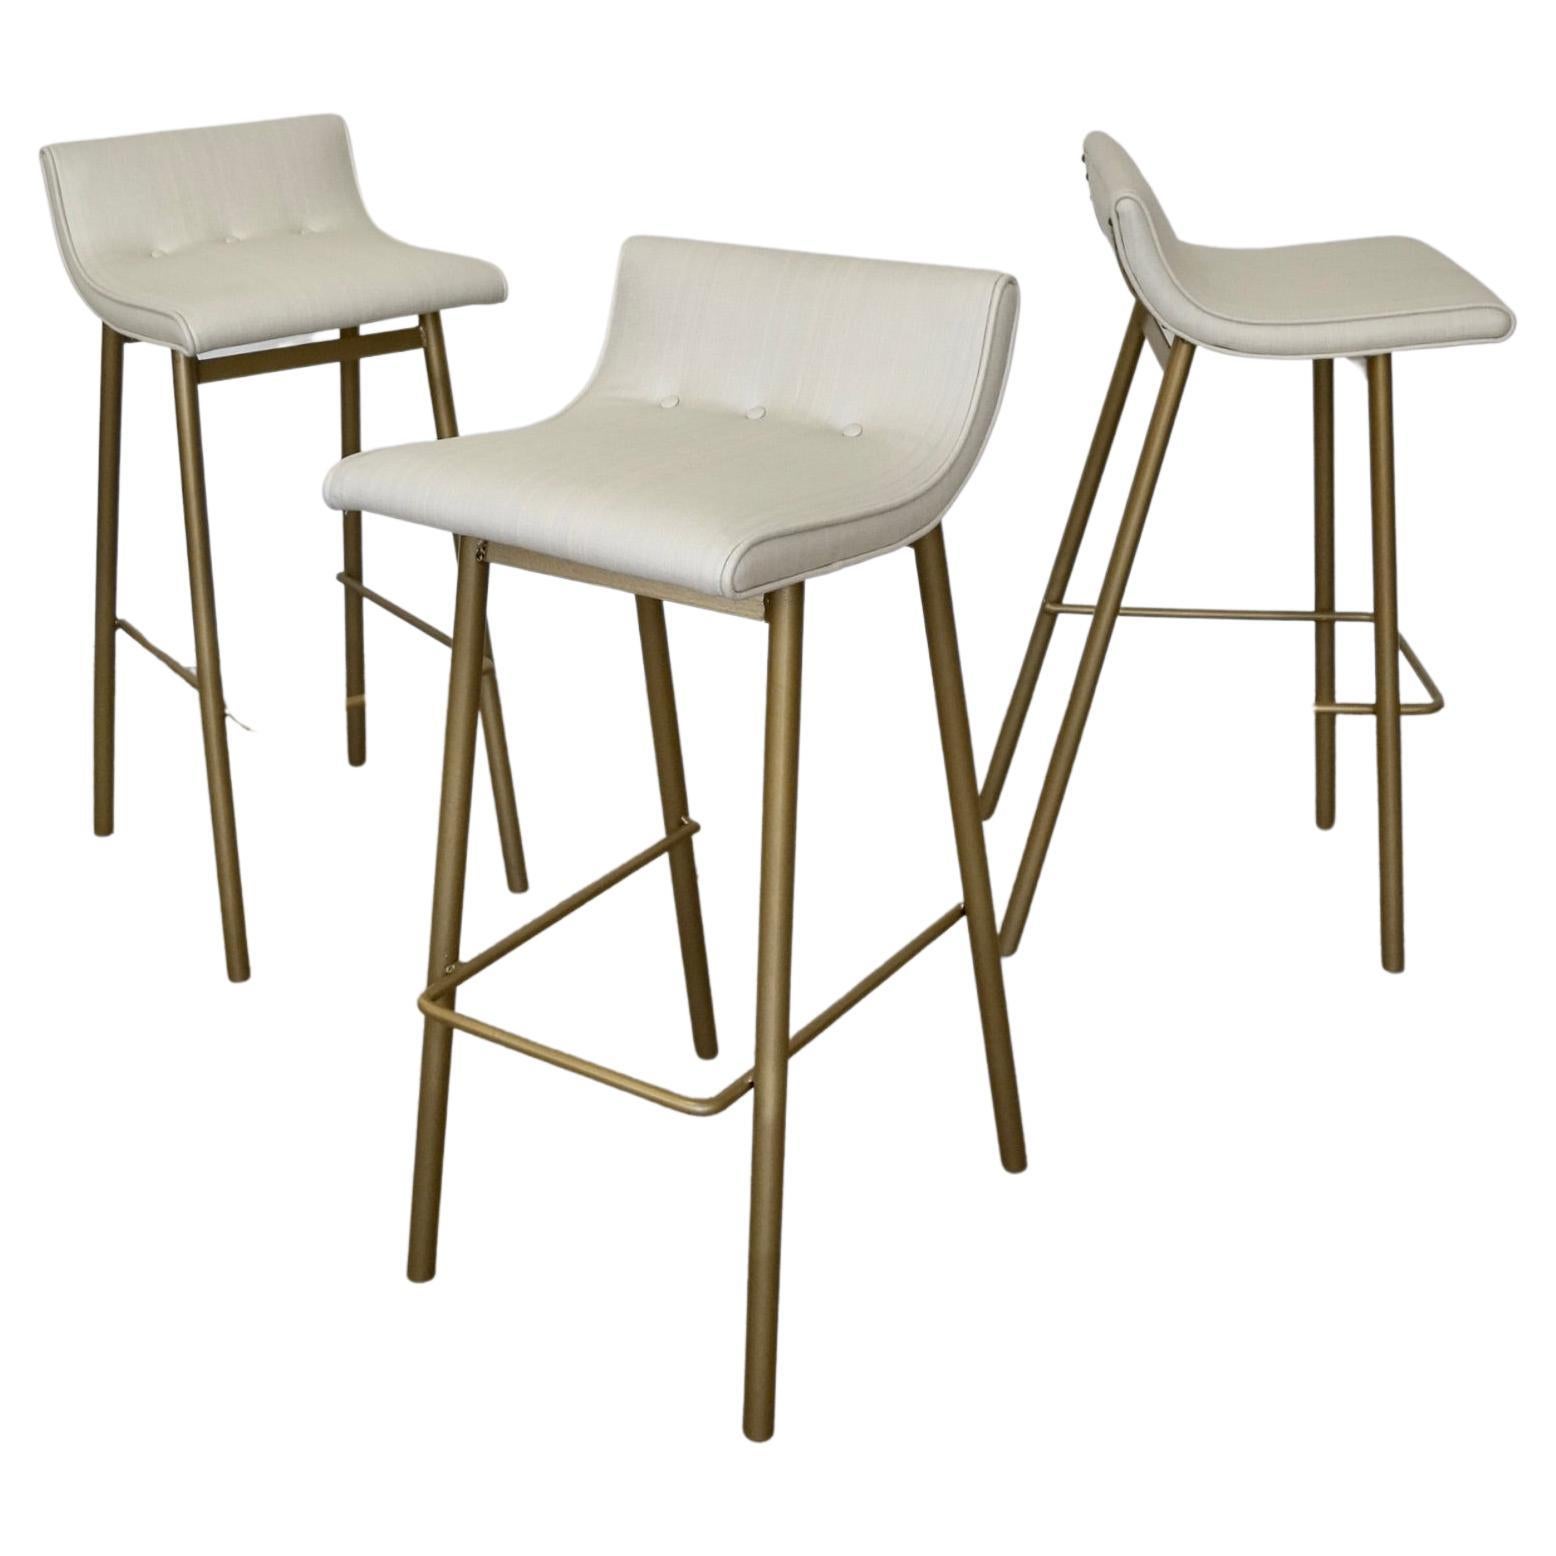 1950's Mid-Century Modern Bar Stools by Vista of California - Set of Three For Sale